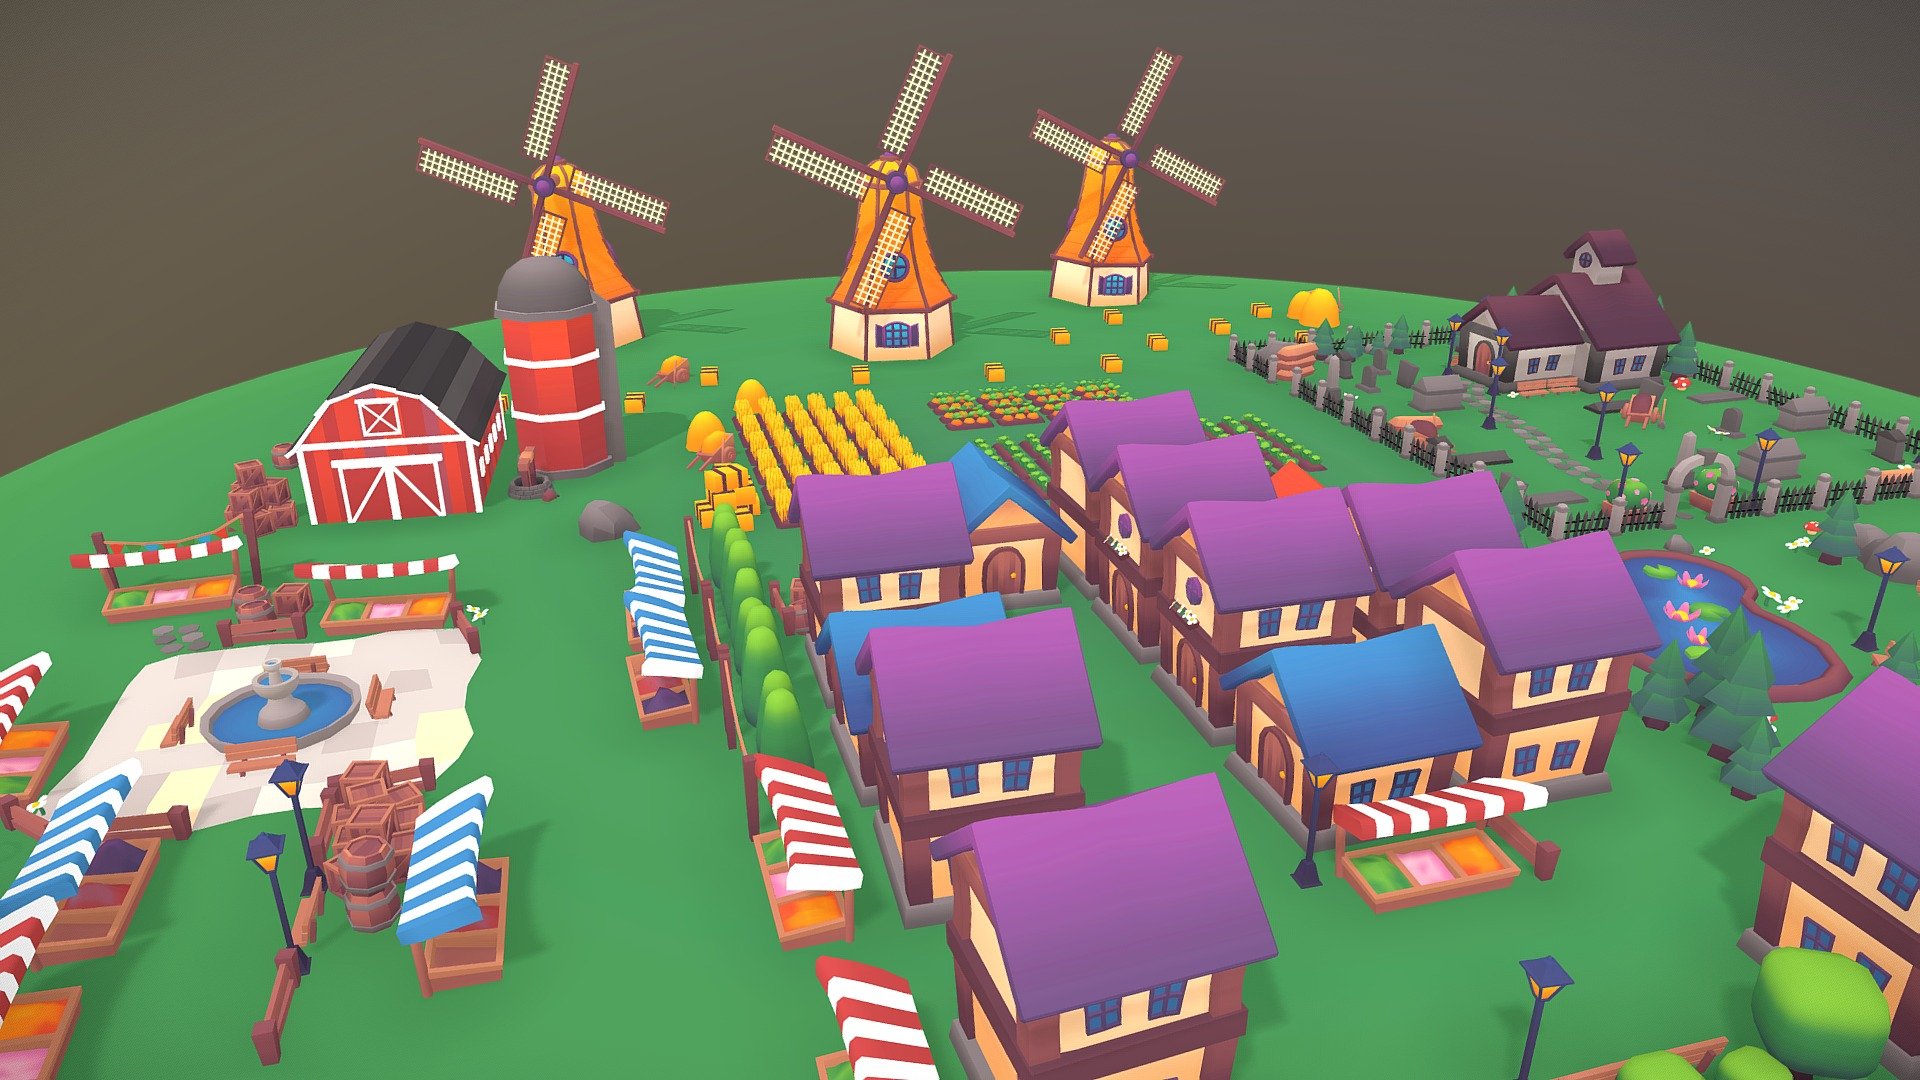 Made this town / village asset pack set for an unsuccessful game prototype
https://imwolfgang.itch.io/picture-cross-towns

Totally free to download in the hope you can get good use out of them than I did! - Village / Town Assets - Download Free 3D model by imwolfgang 3d model